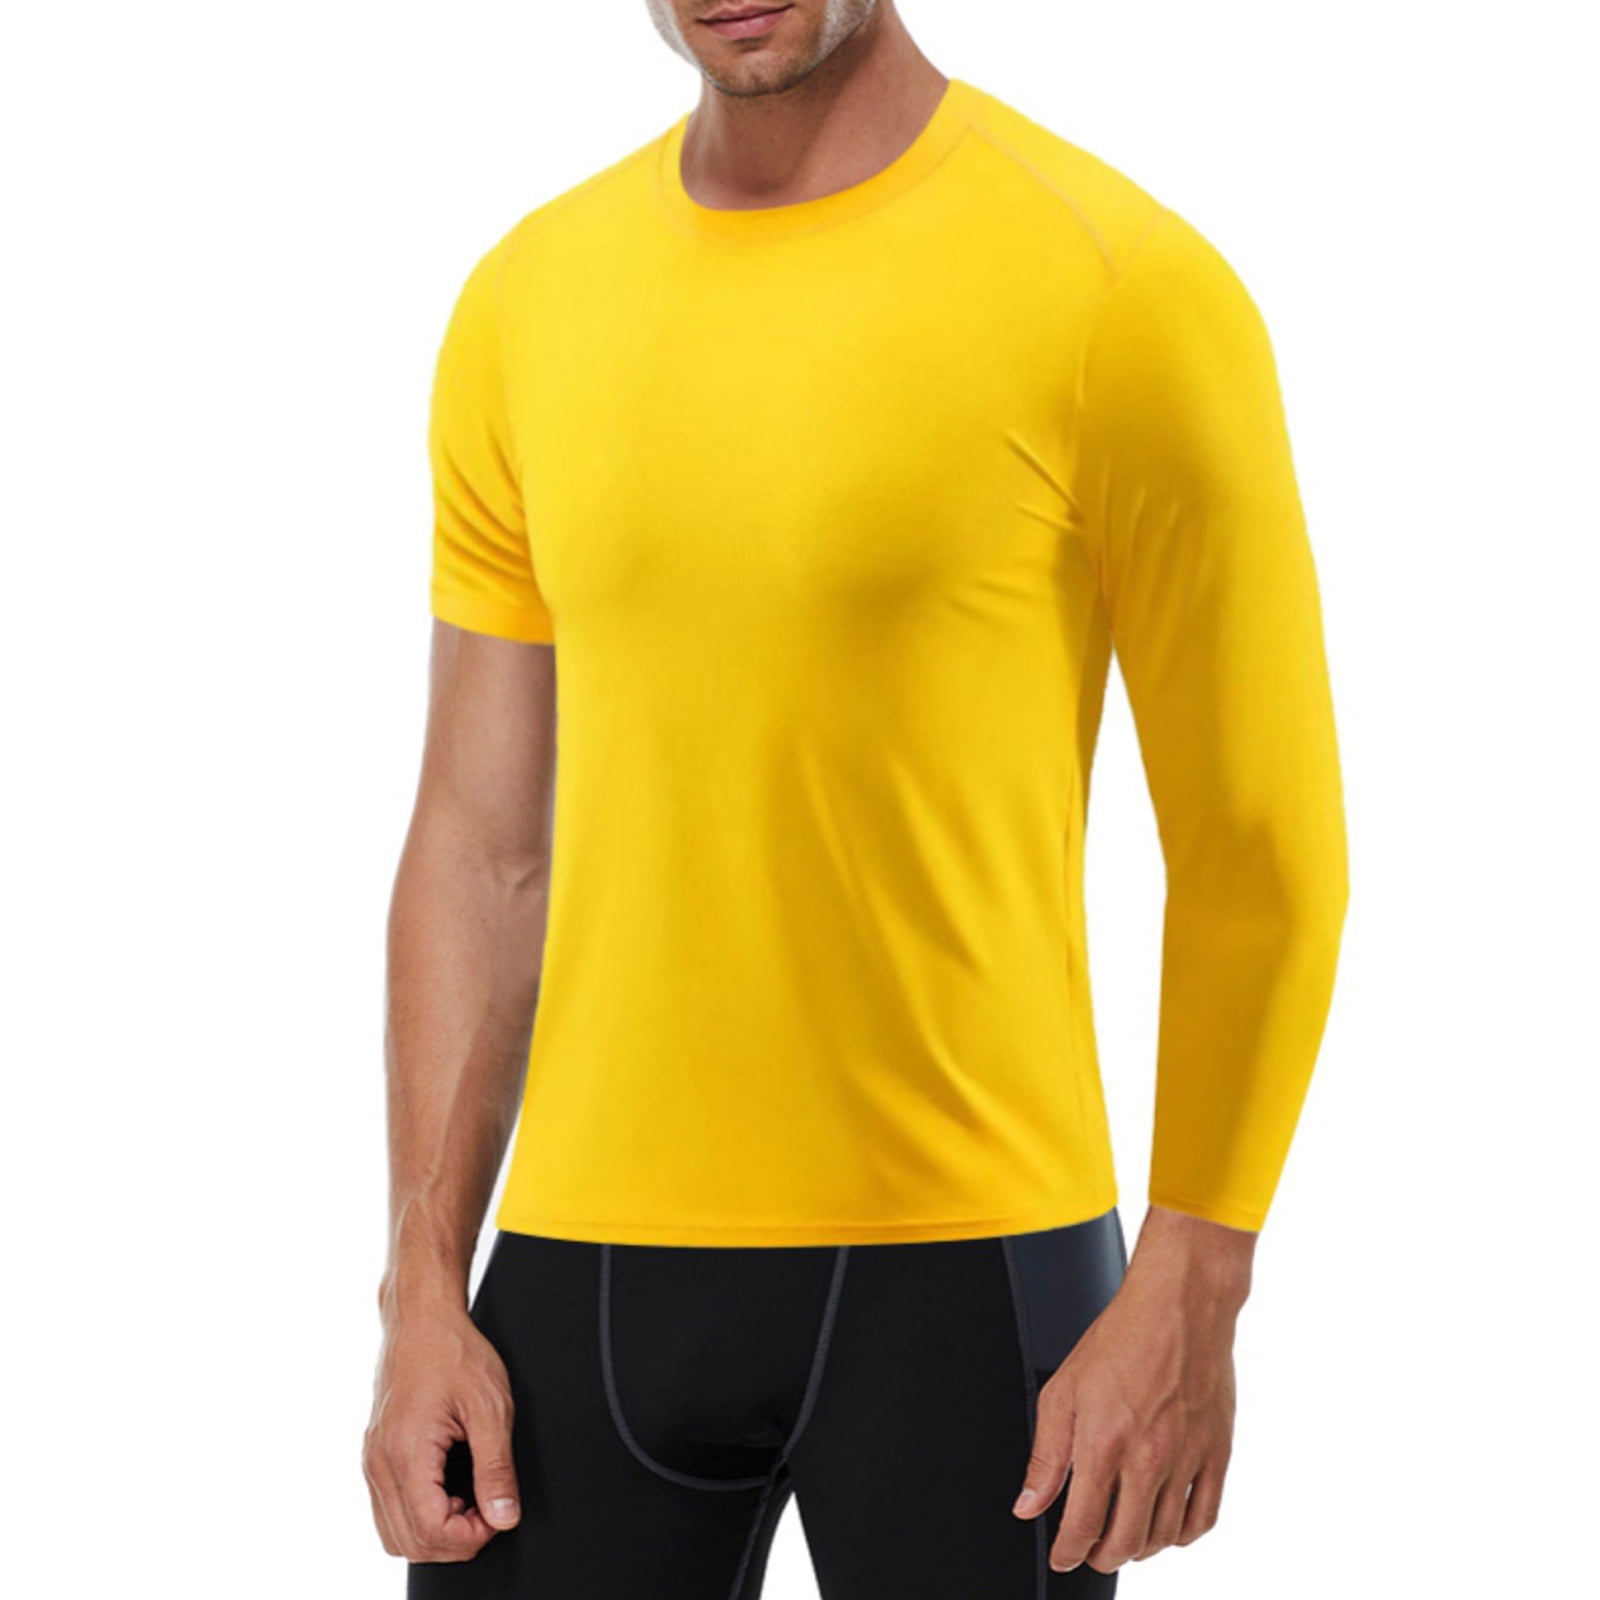 Xmarks Men's Quick Dry Compression Shirts 1/2 Single Arm Long Sleeve  Athletic Base Layer T Shirt Workout Running Tee Top Basketball Tights,  S-3XL 